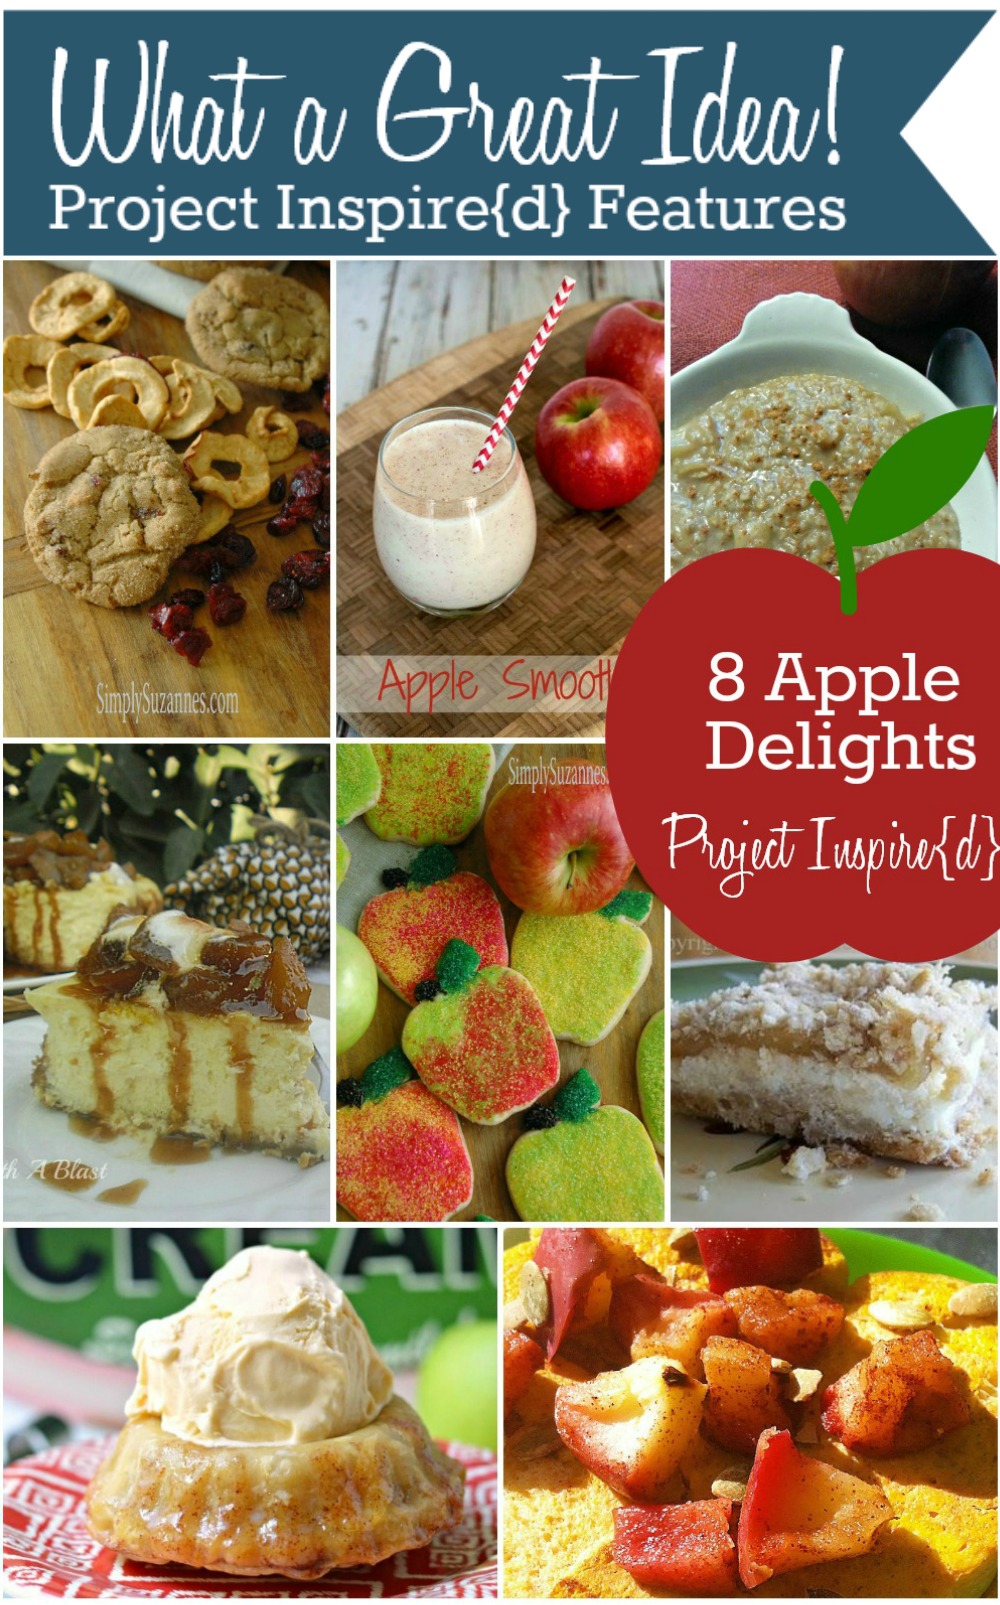 PI Features: 8 Apple Delights